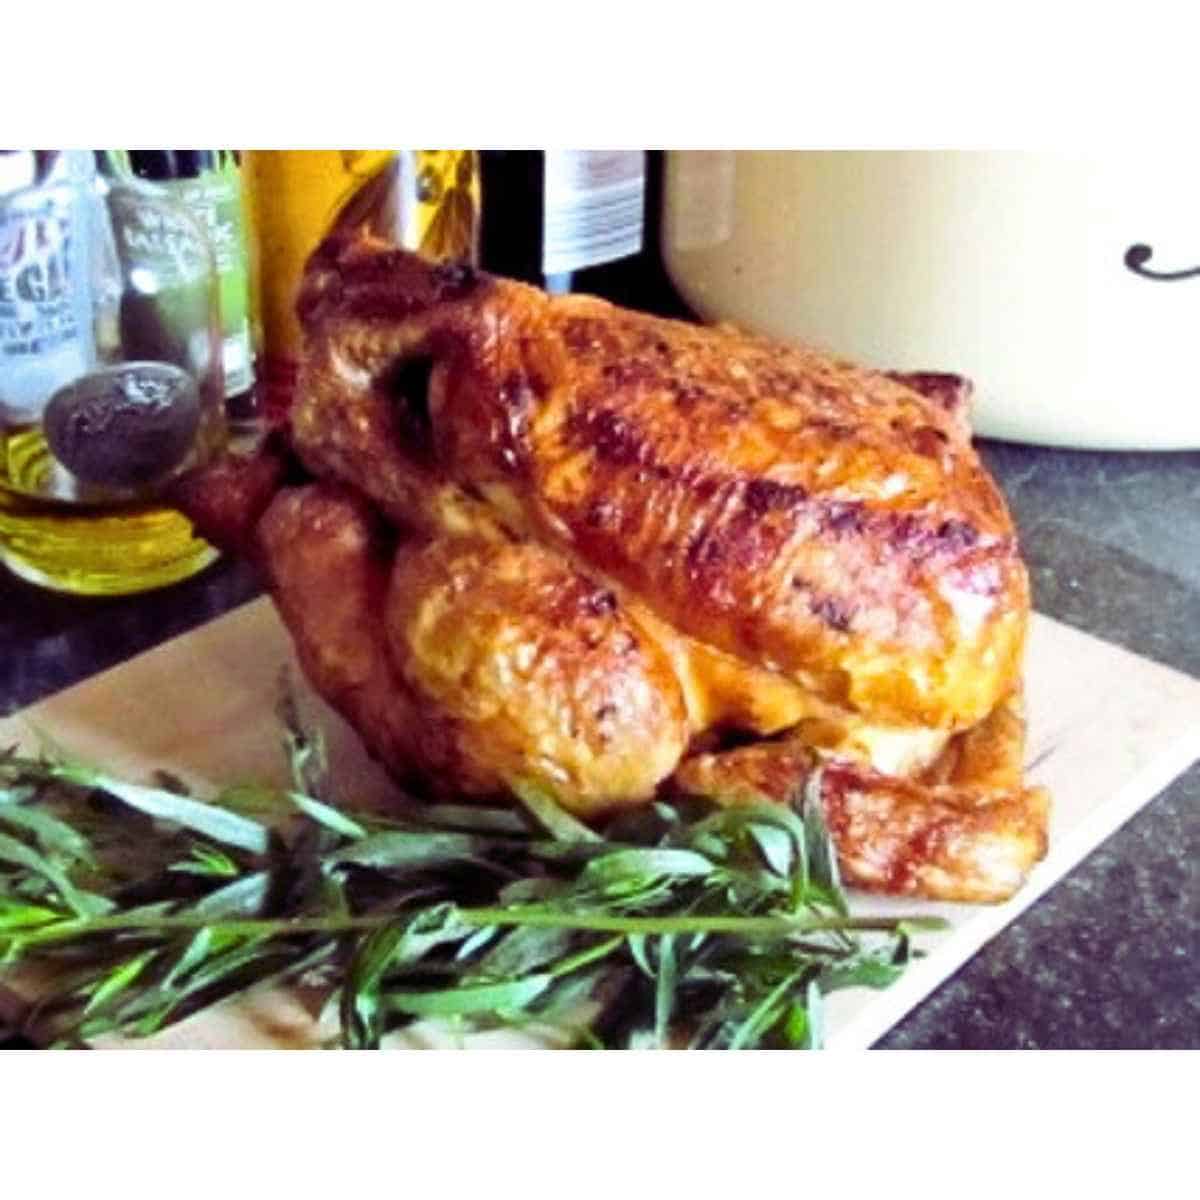 Roasted whole chicken with sprig of tarragon on a white cutting board.